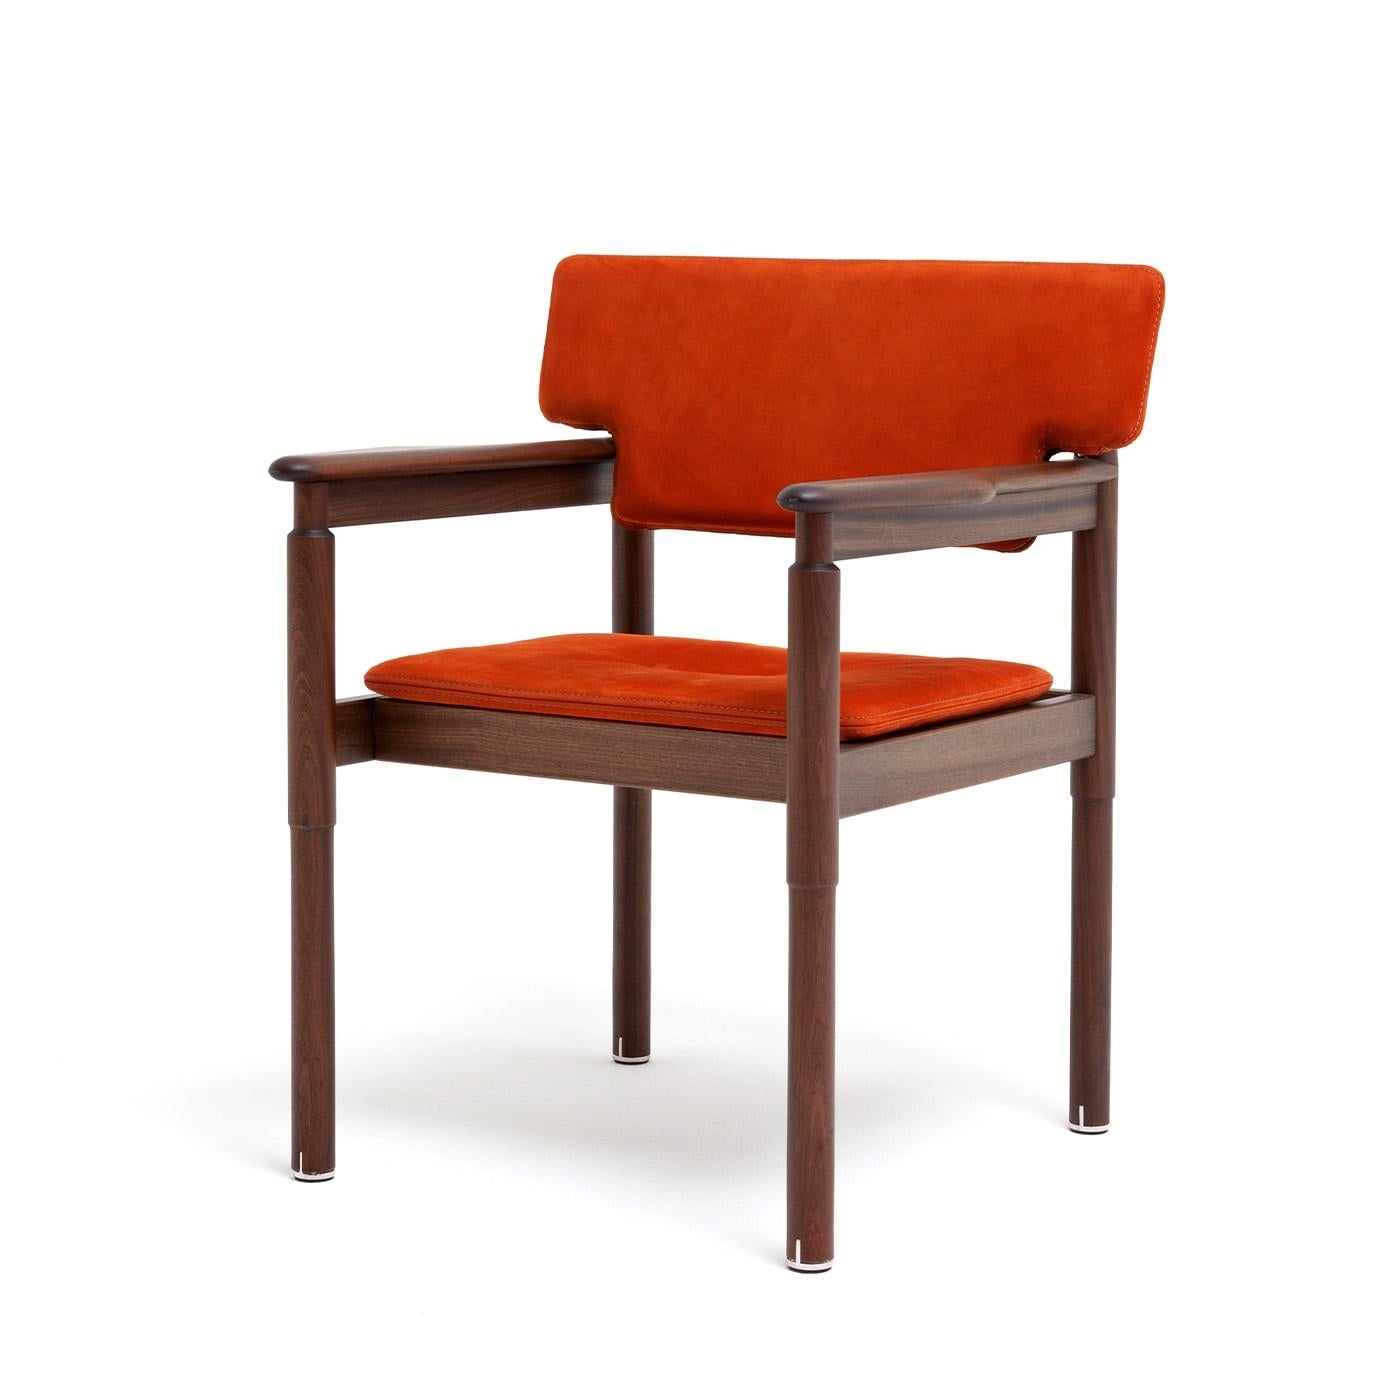 Hand-Crafted 10th Vieste Chair by Massimo Castagna